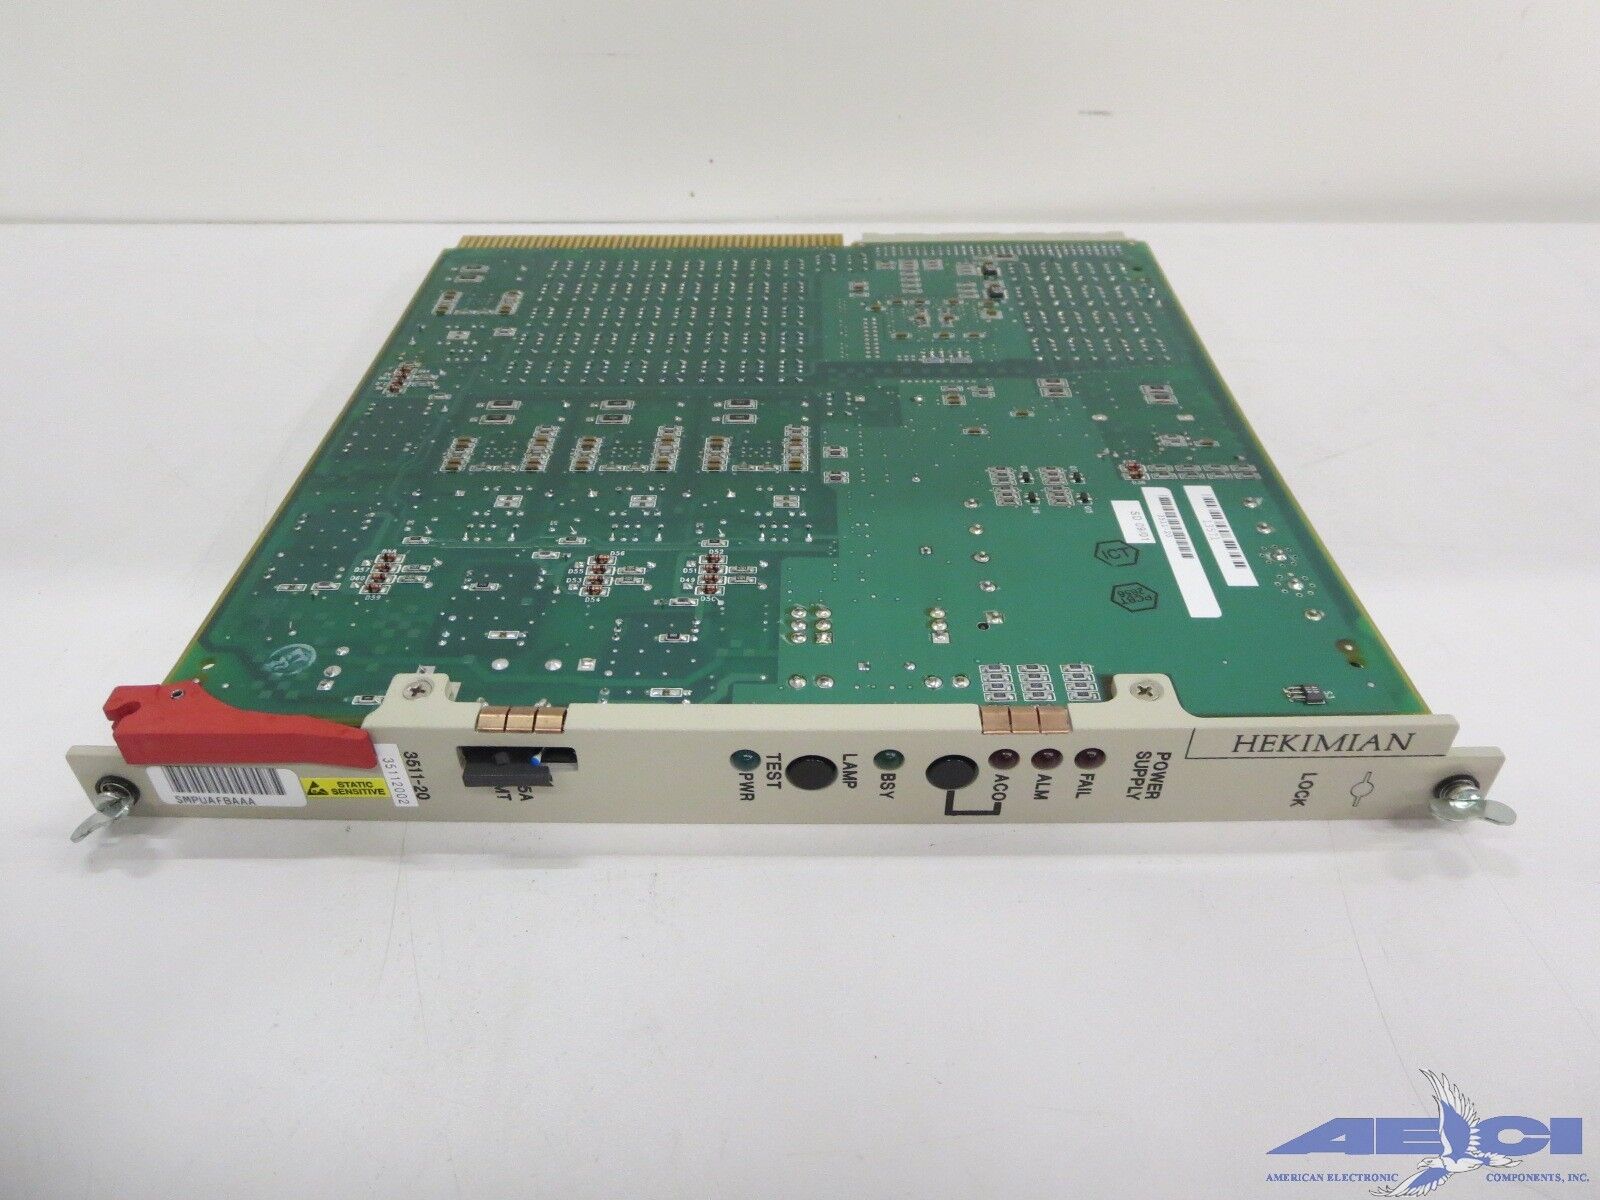 HEKIMIAN 3511-20, COPPERMAX/A -48V POWER SUPPLY, SMPUAFBAAA